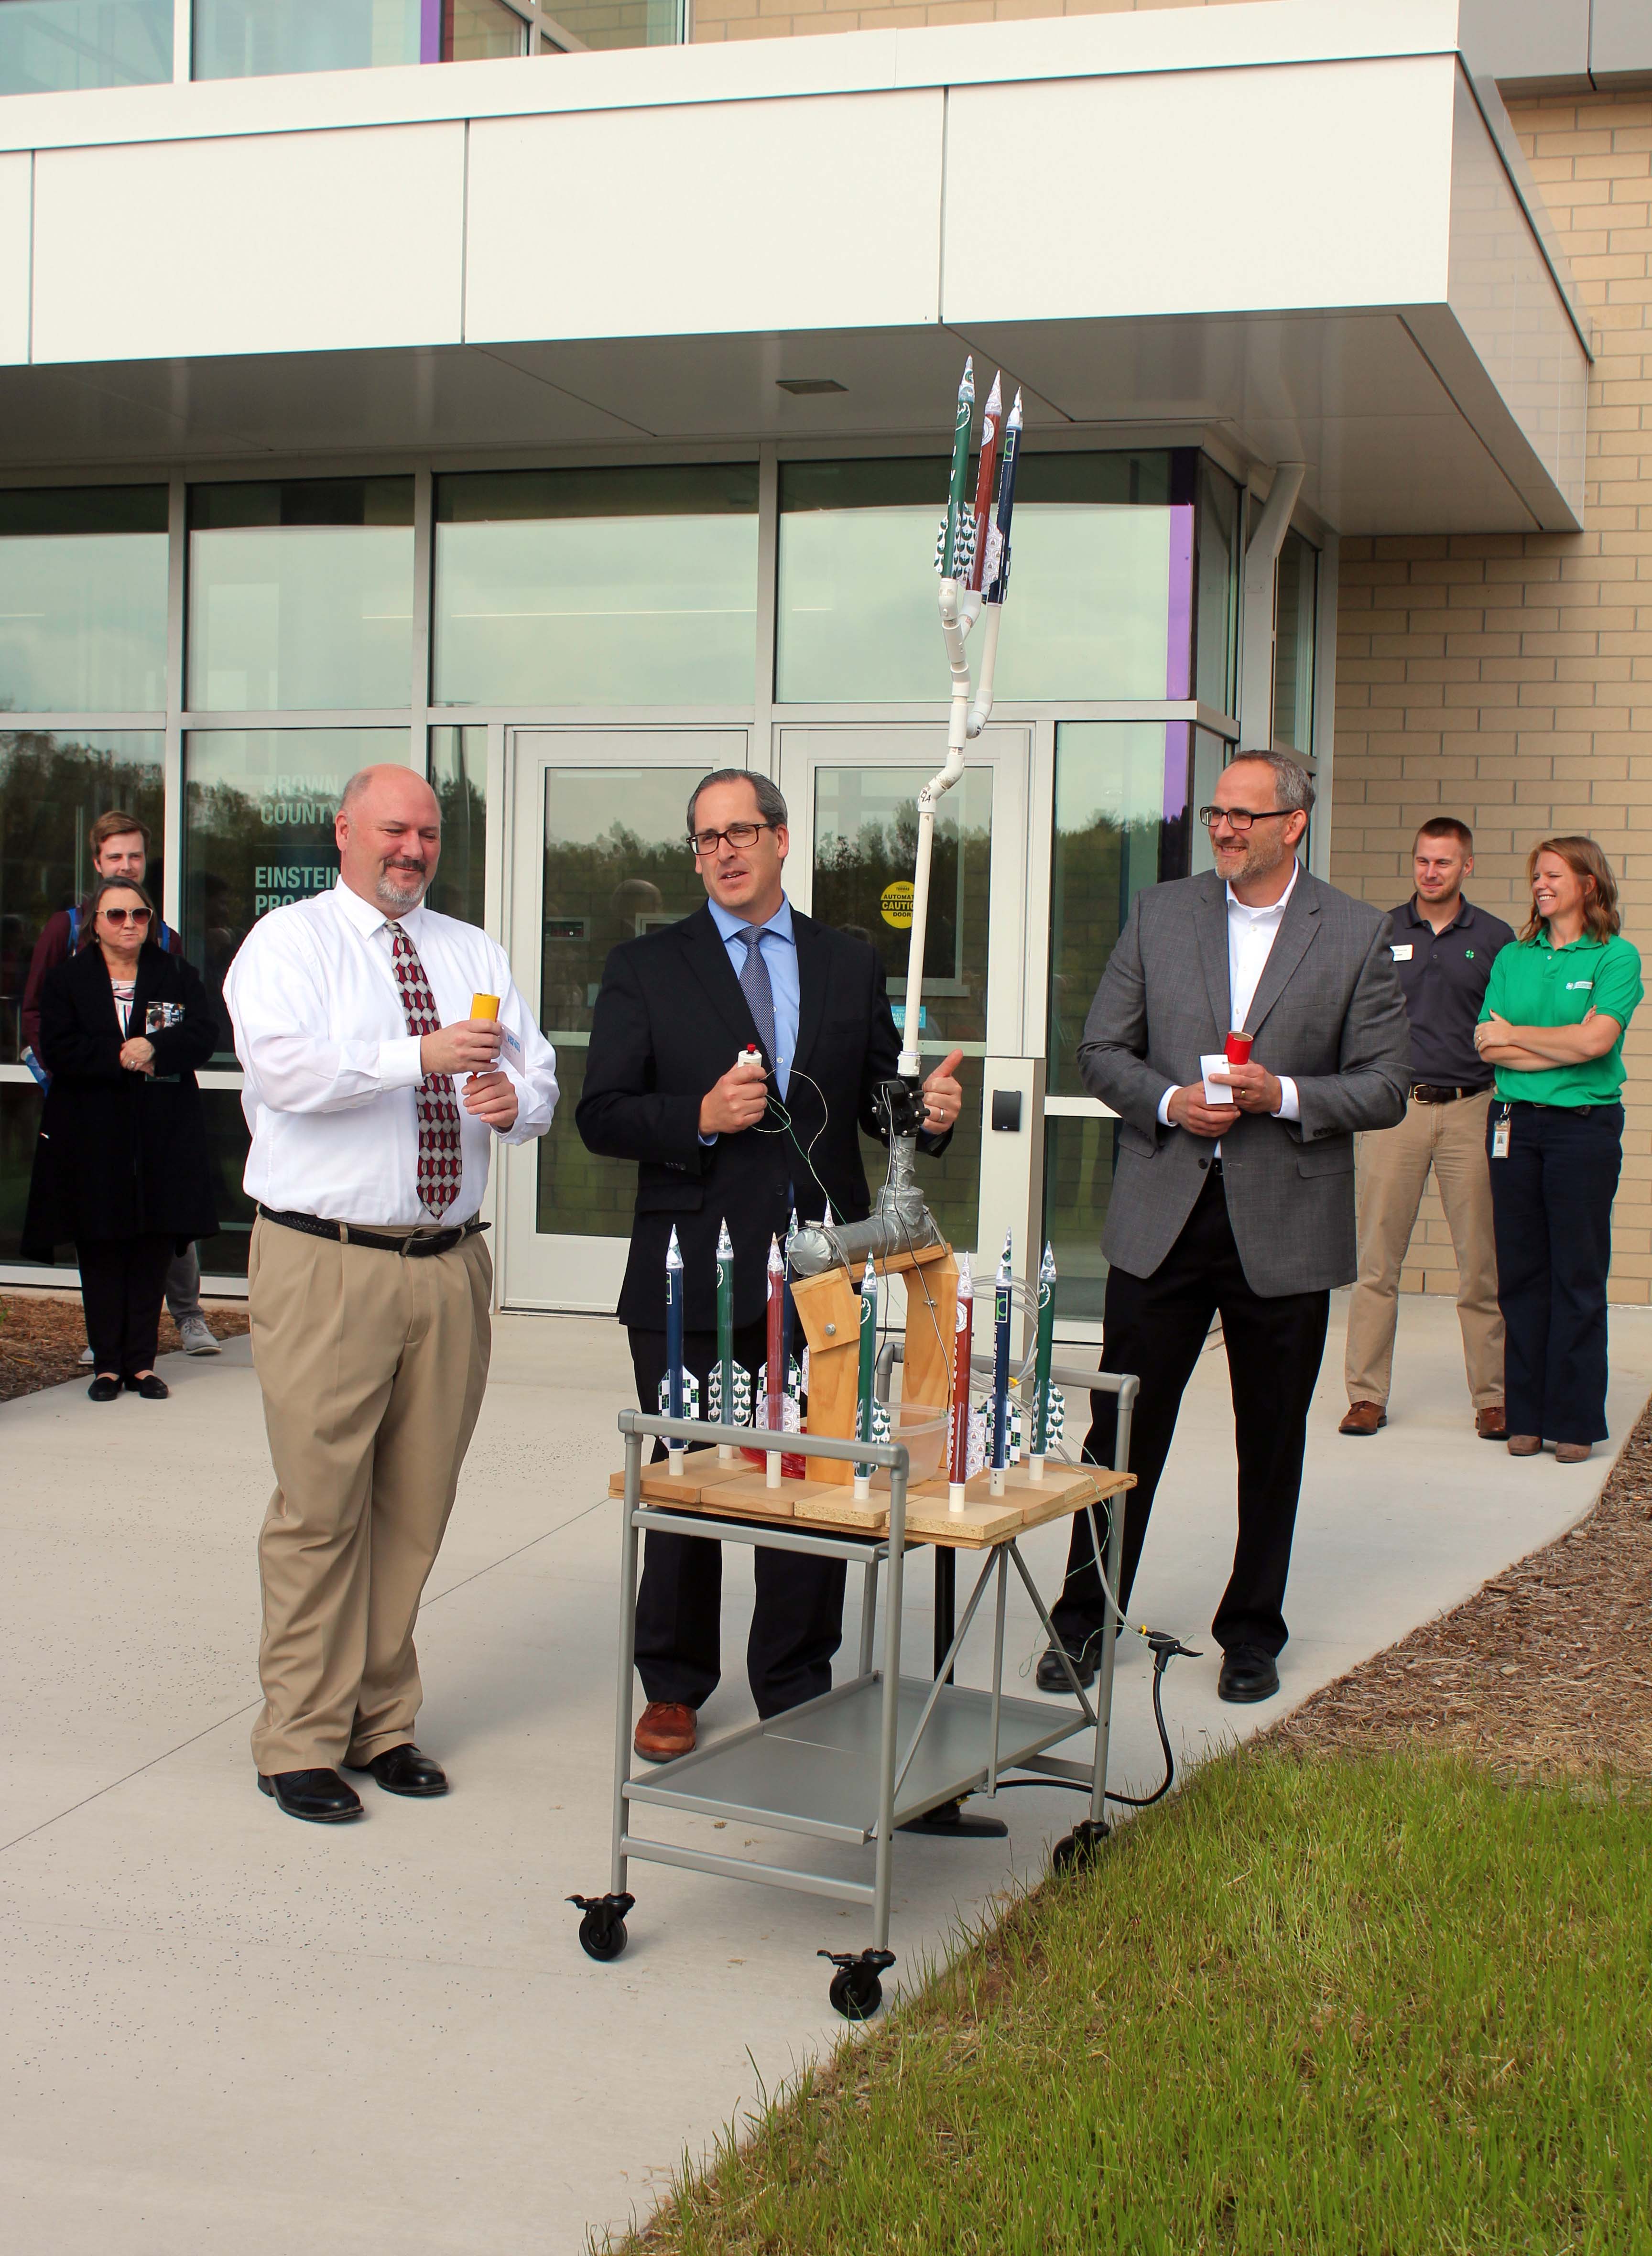 STEM Innovation center officially ‘launched’ at UWGB